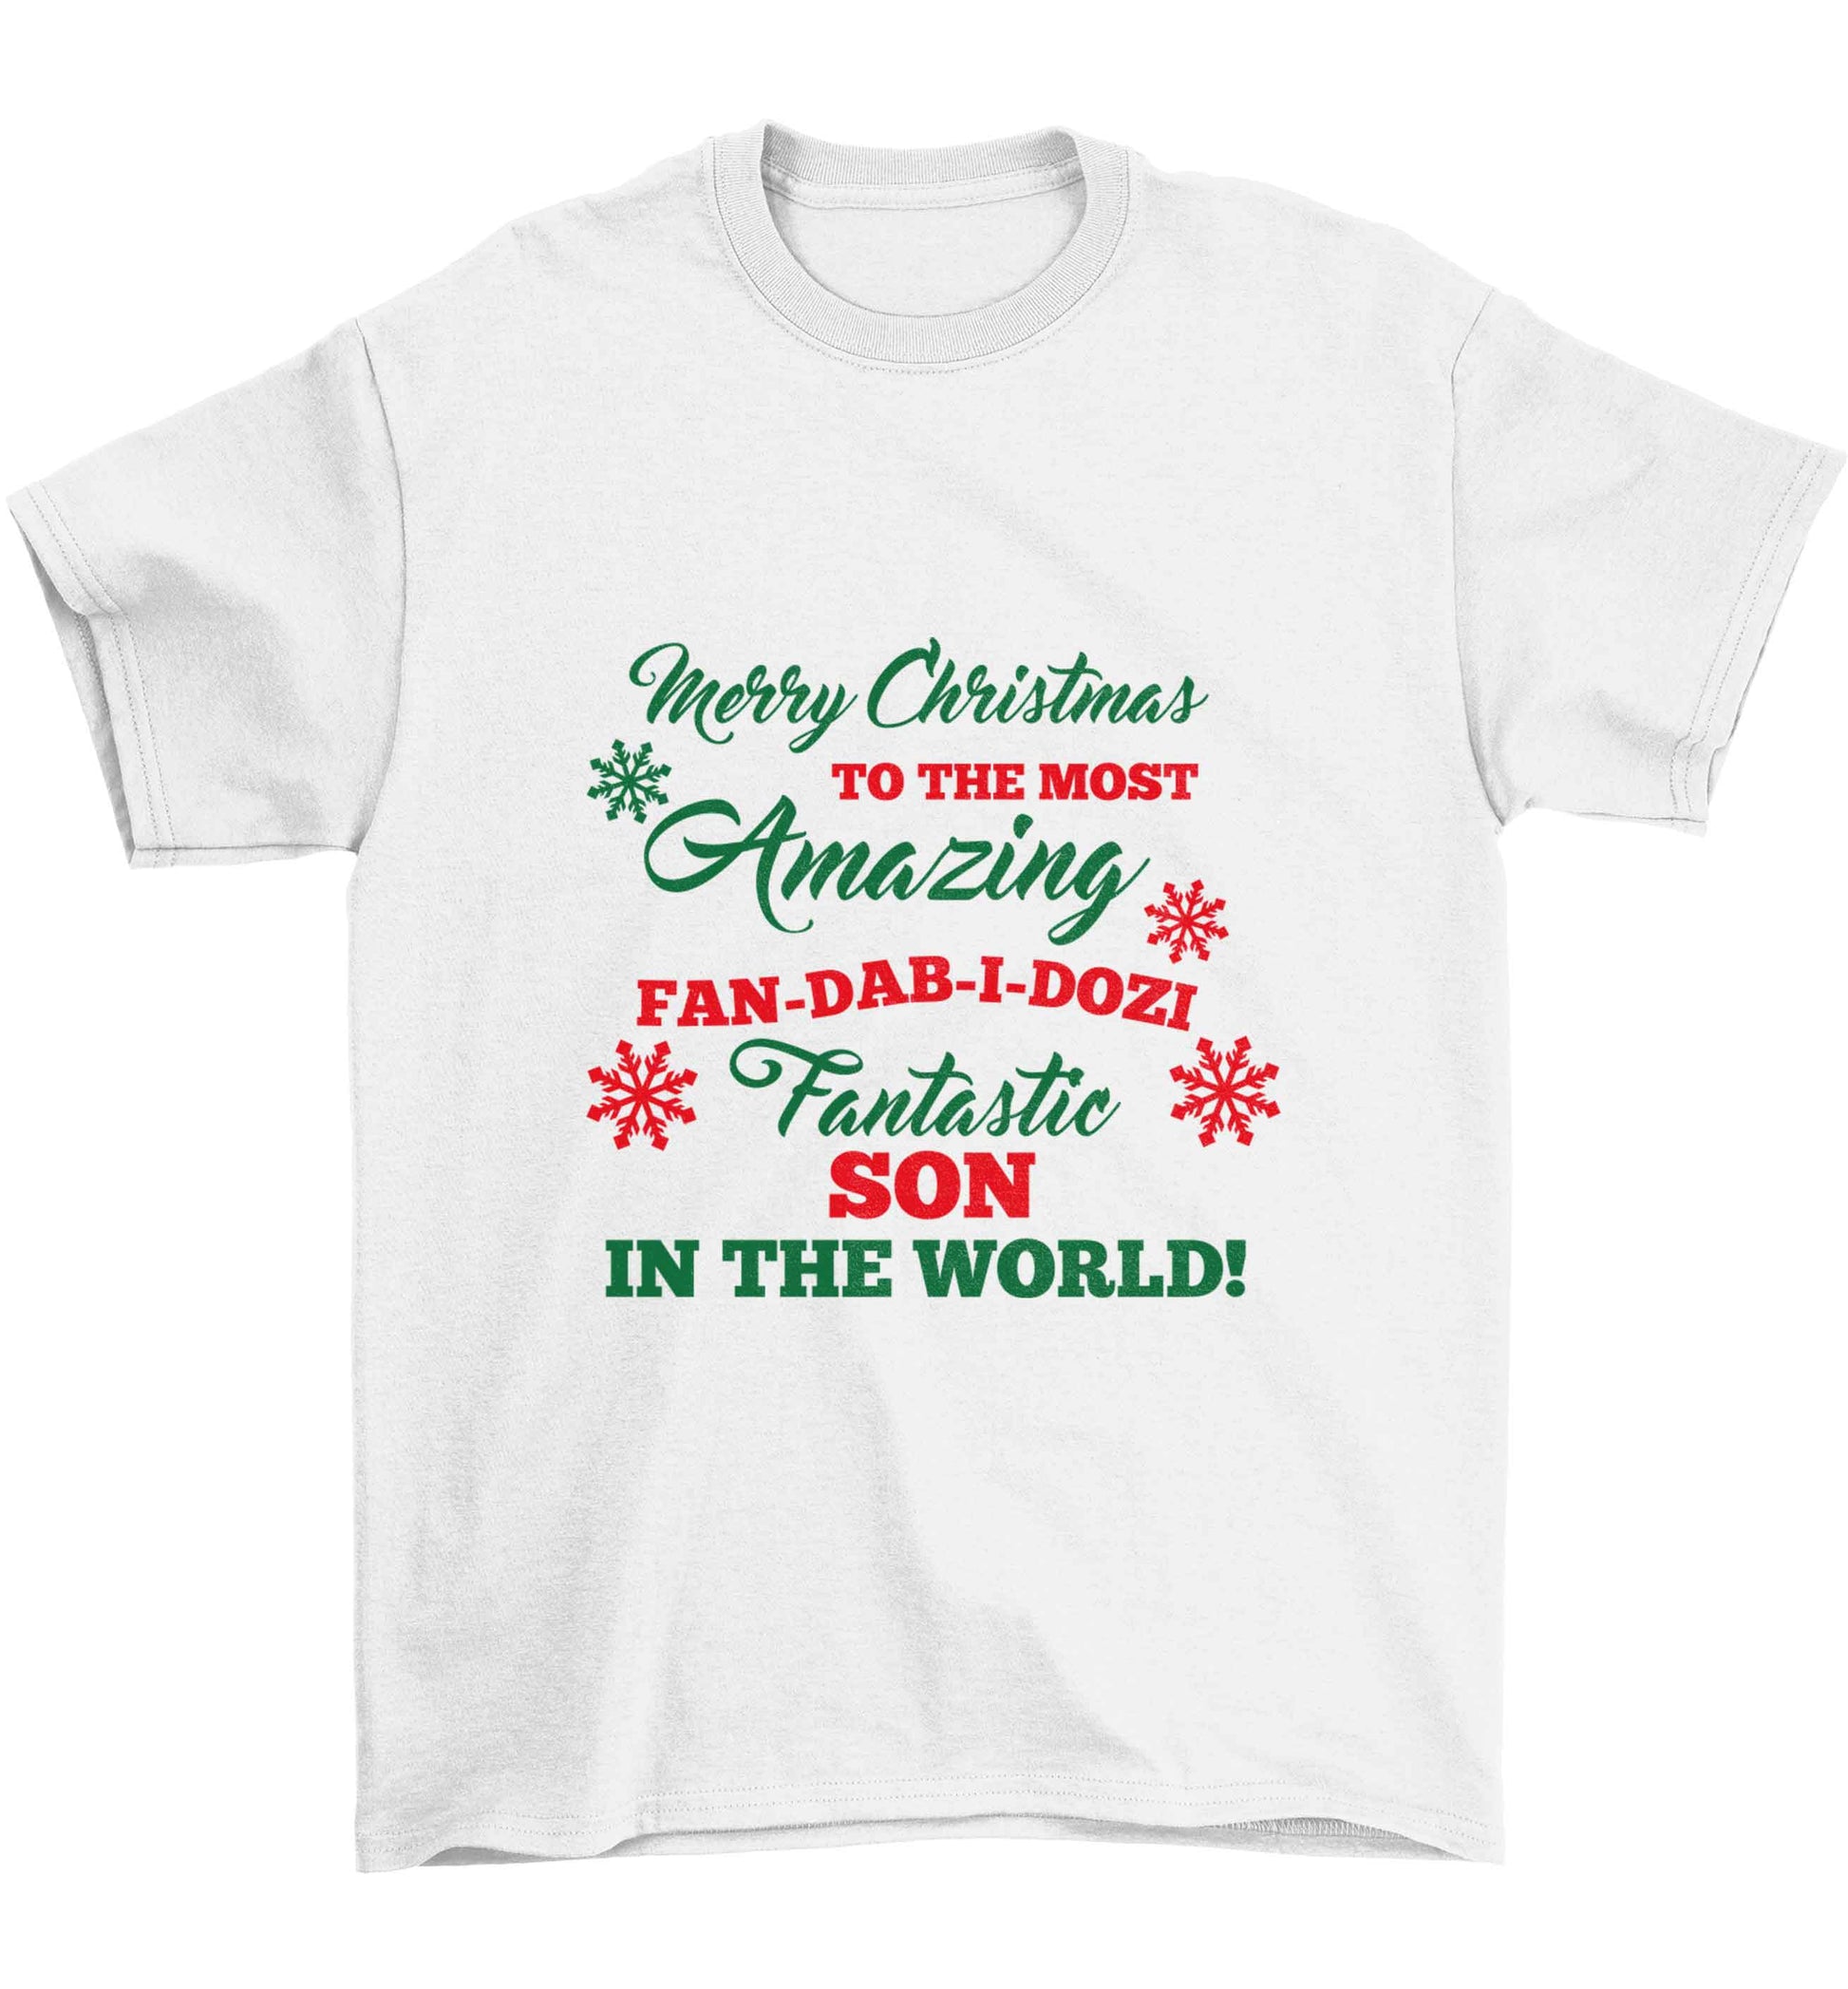 Merry Christmas to the most amazing fan-dab-i-dozi fantasic Son in the world Children's white Tshirt 12-13 Years